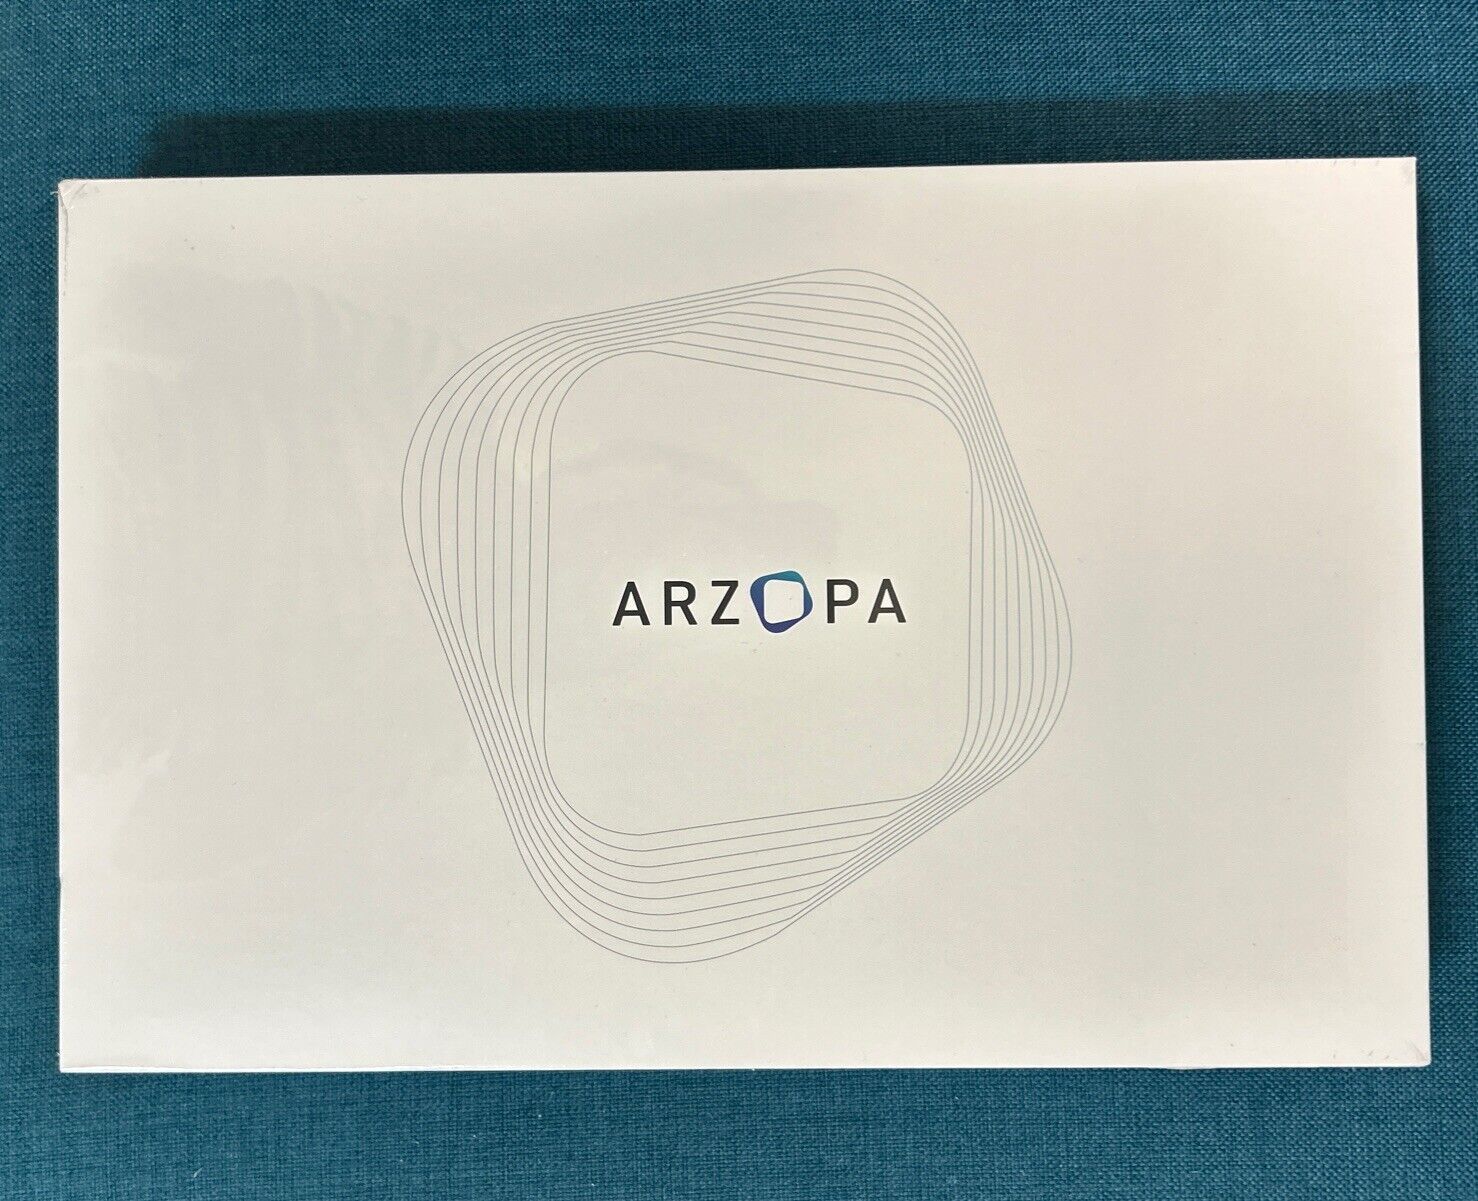 Arzopa 15.6 inches 1080P Portable Monitor New Sealed